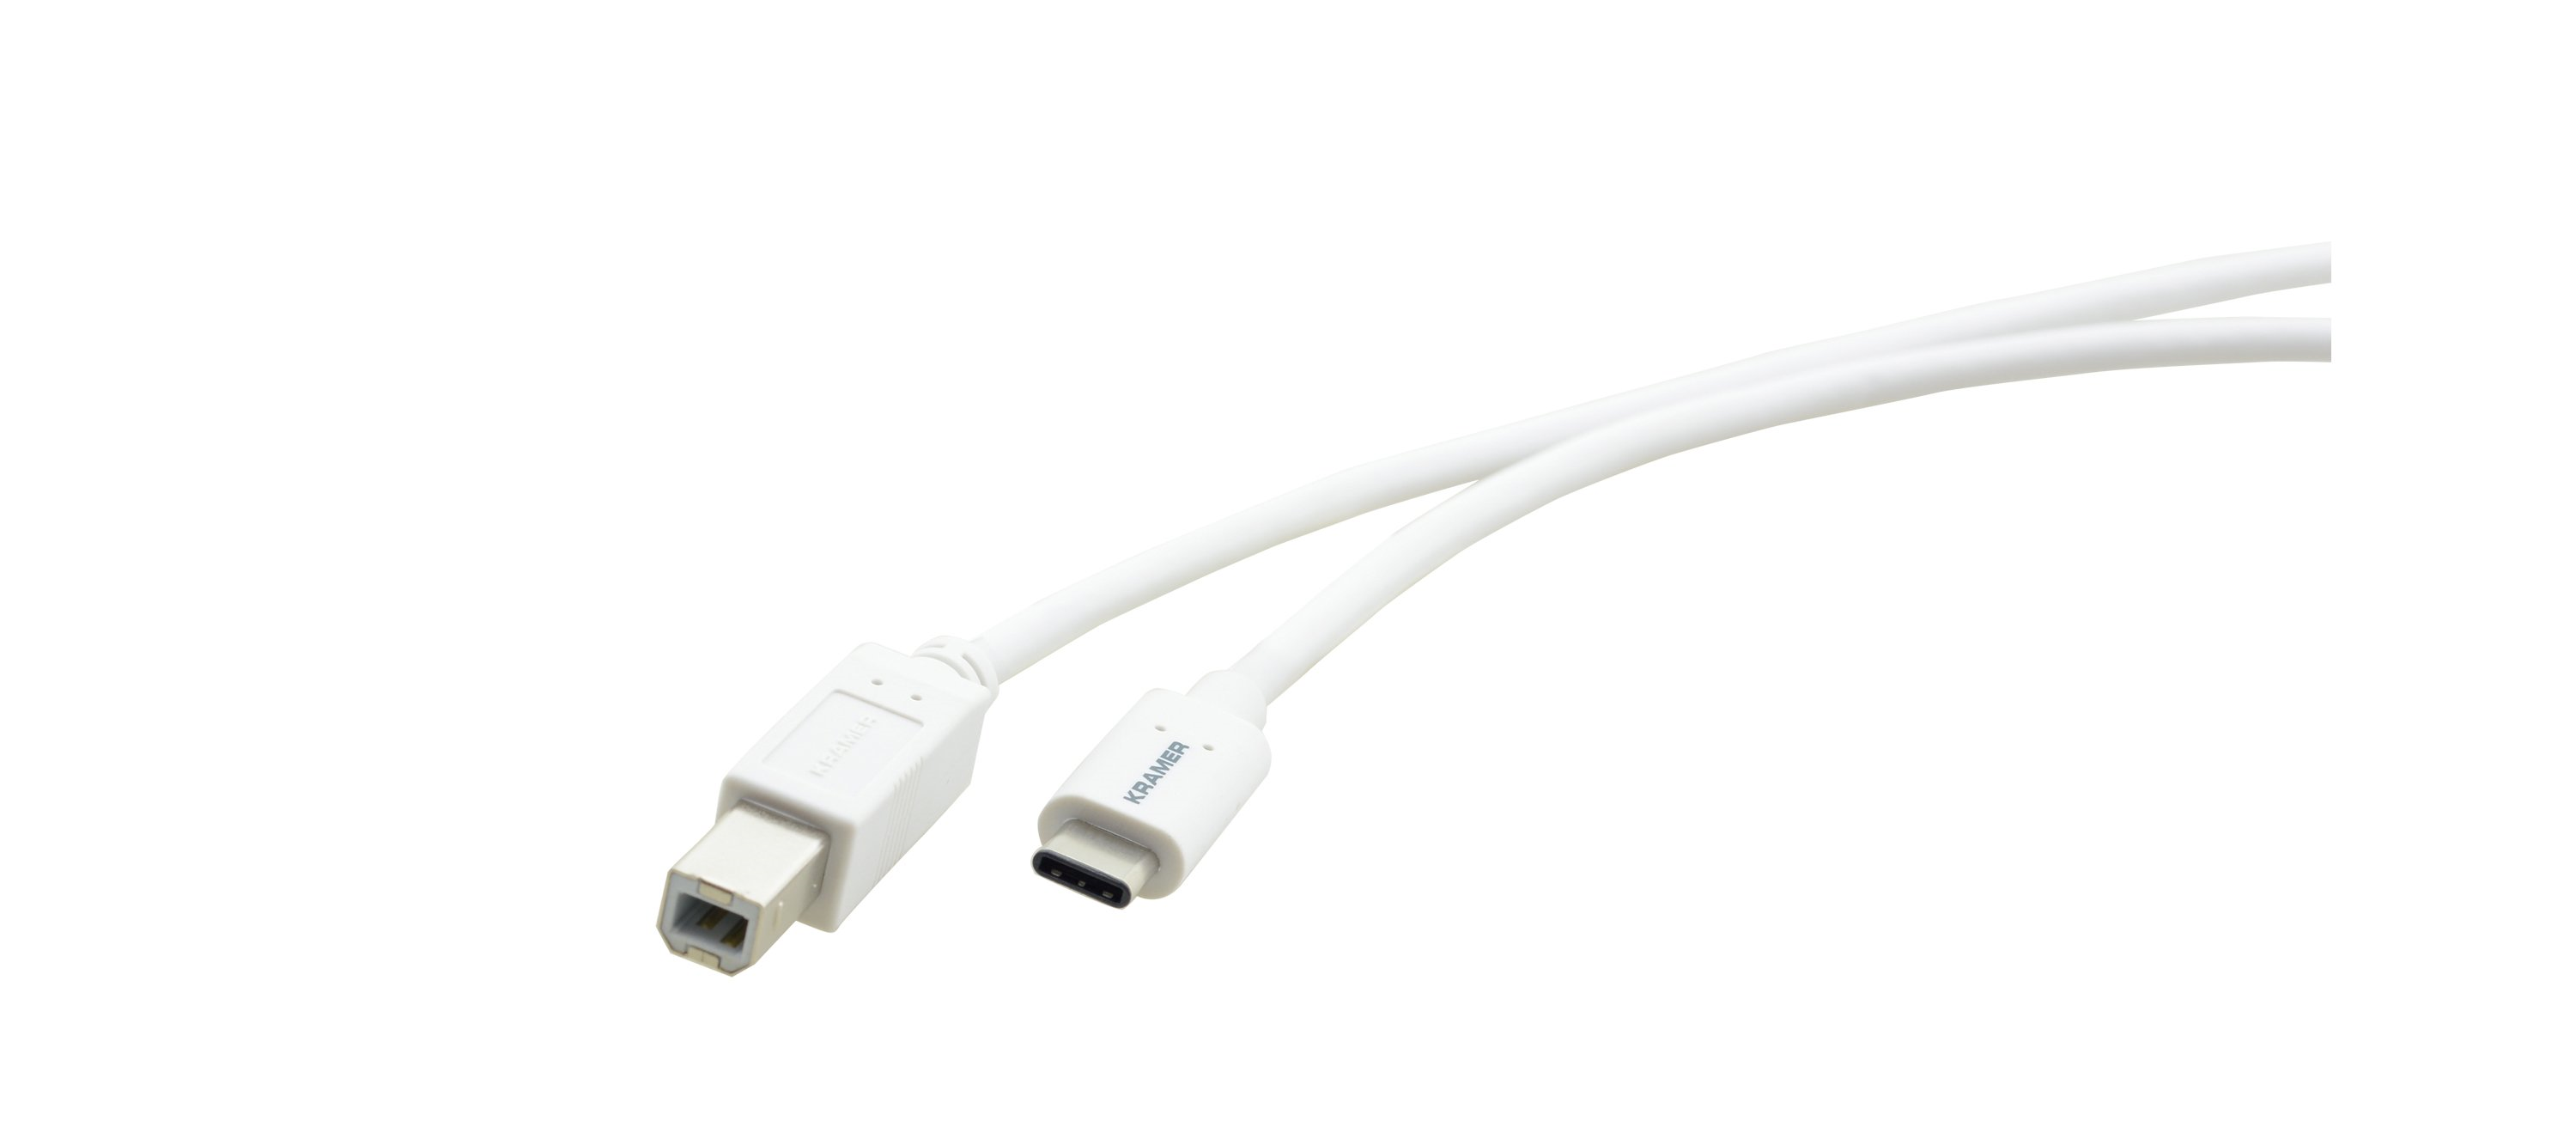 C-USB/CB-10 USB 2.0 C(M) to B(M) Cable-10ft